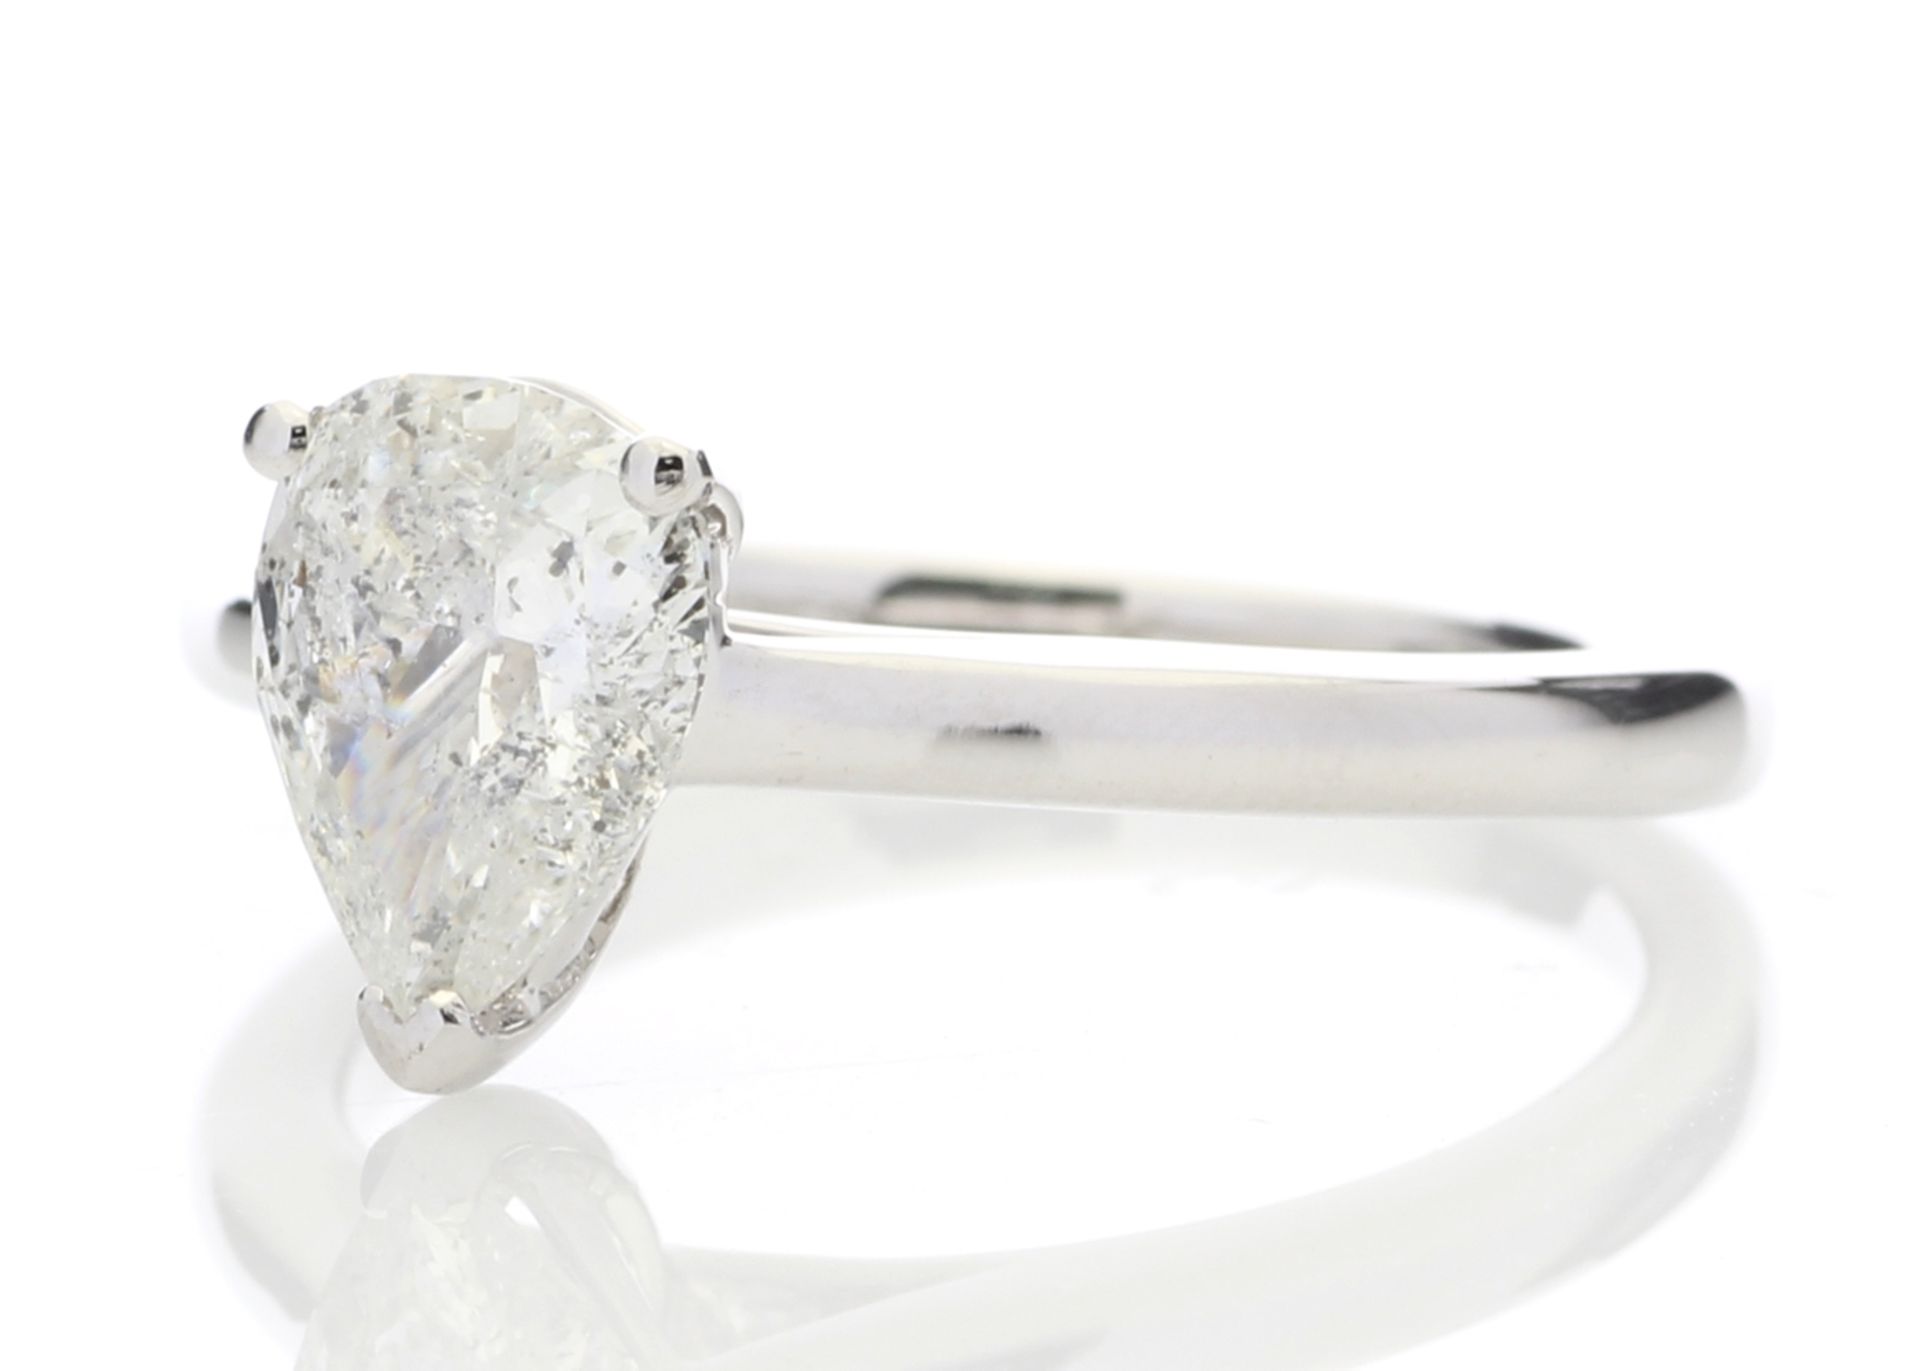 18ct White Gold Pear Cut Diamond Ring 1.02 Carats - Valued By GIE £18,350.00 - One stunning - Image 2 of 5